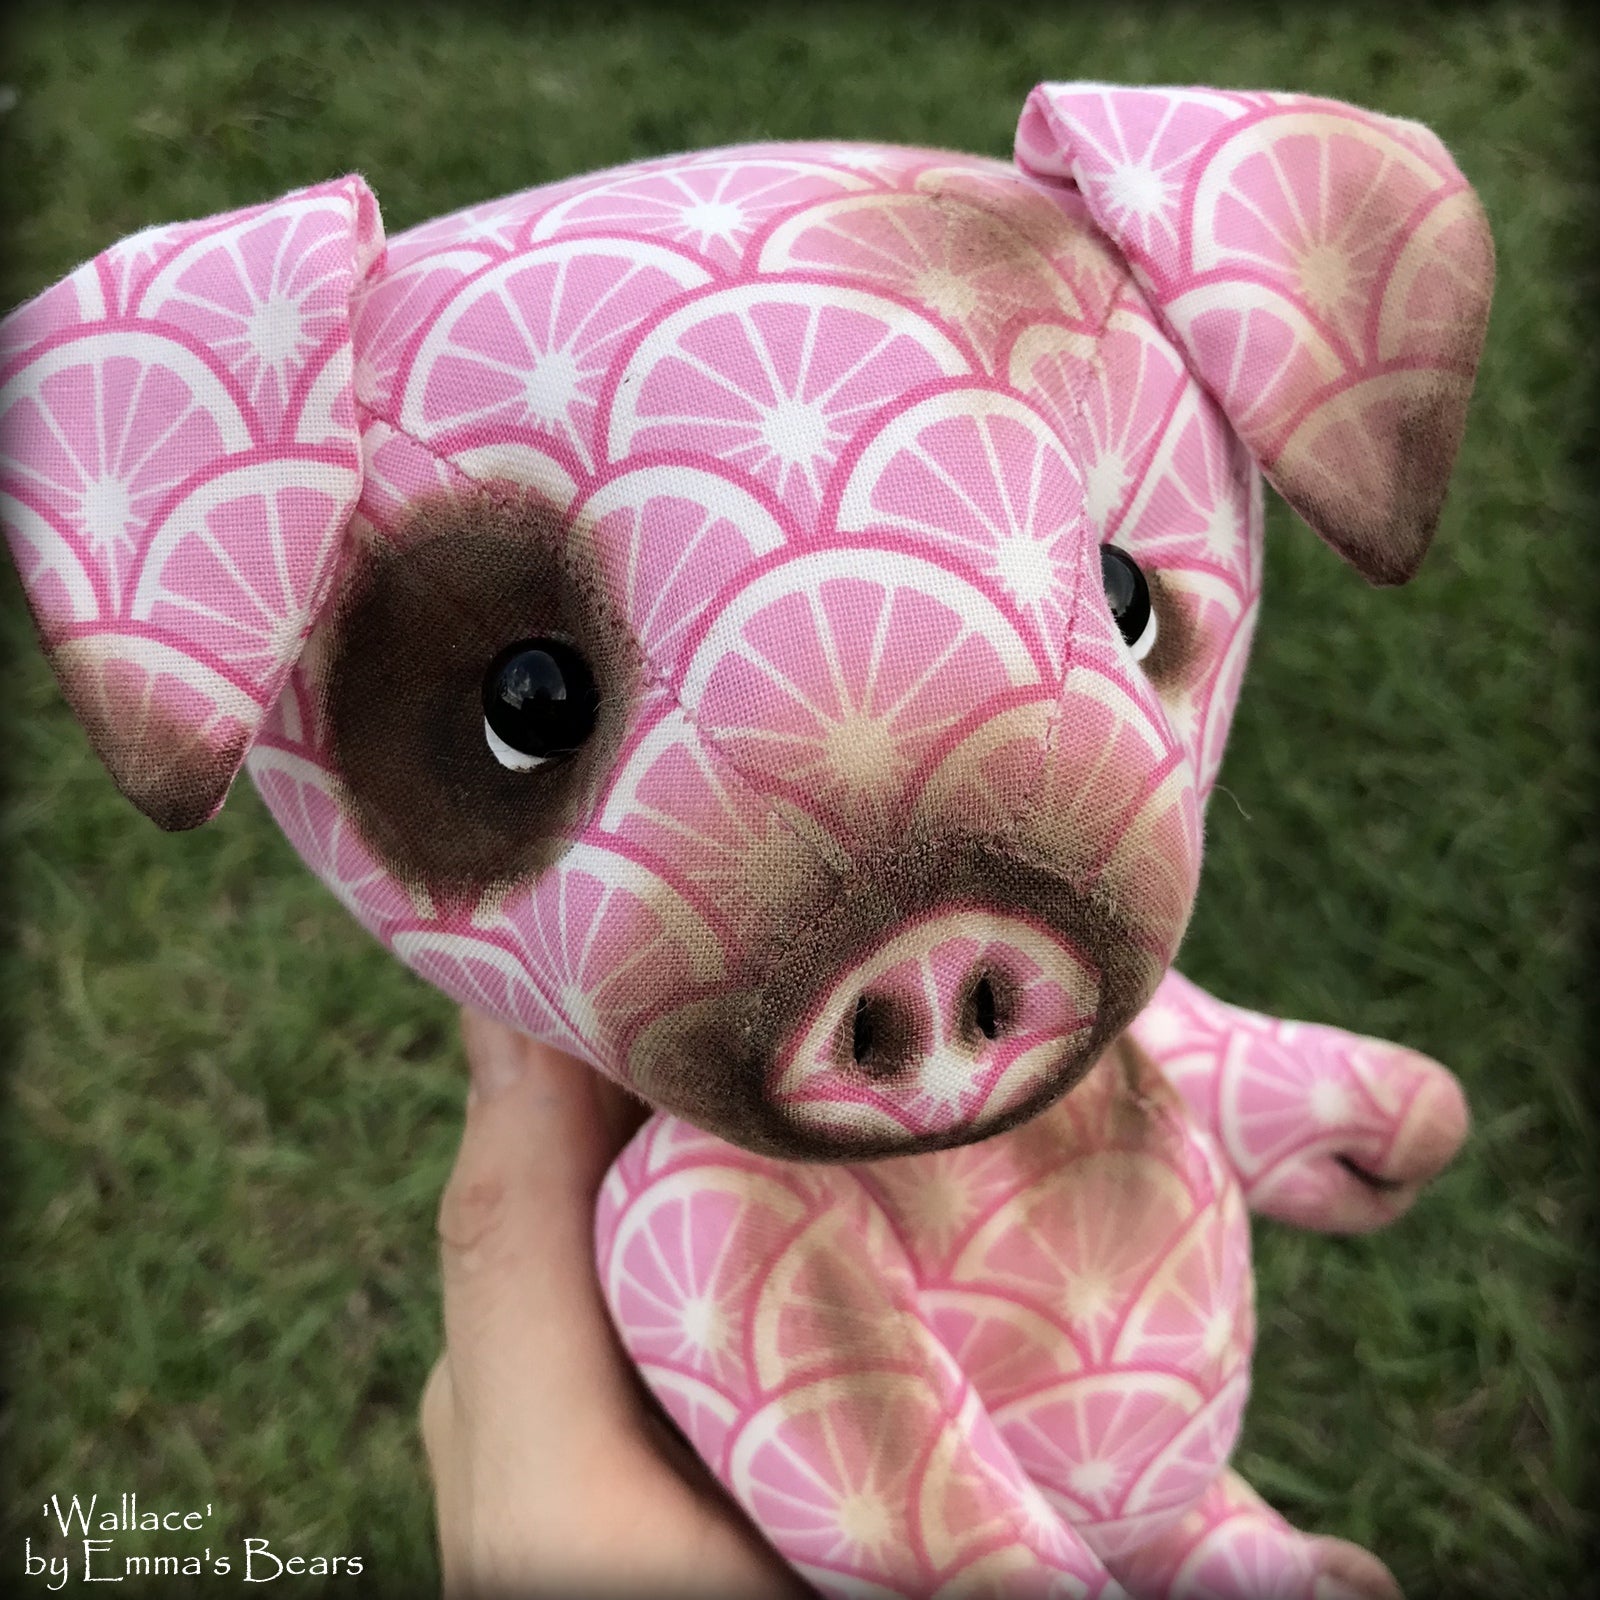 KITS - 9" Wallace Jointed Cotton Pig